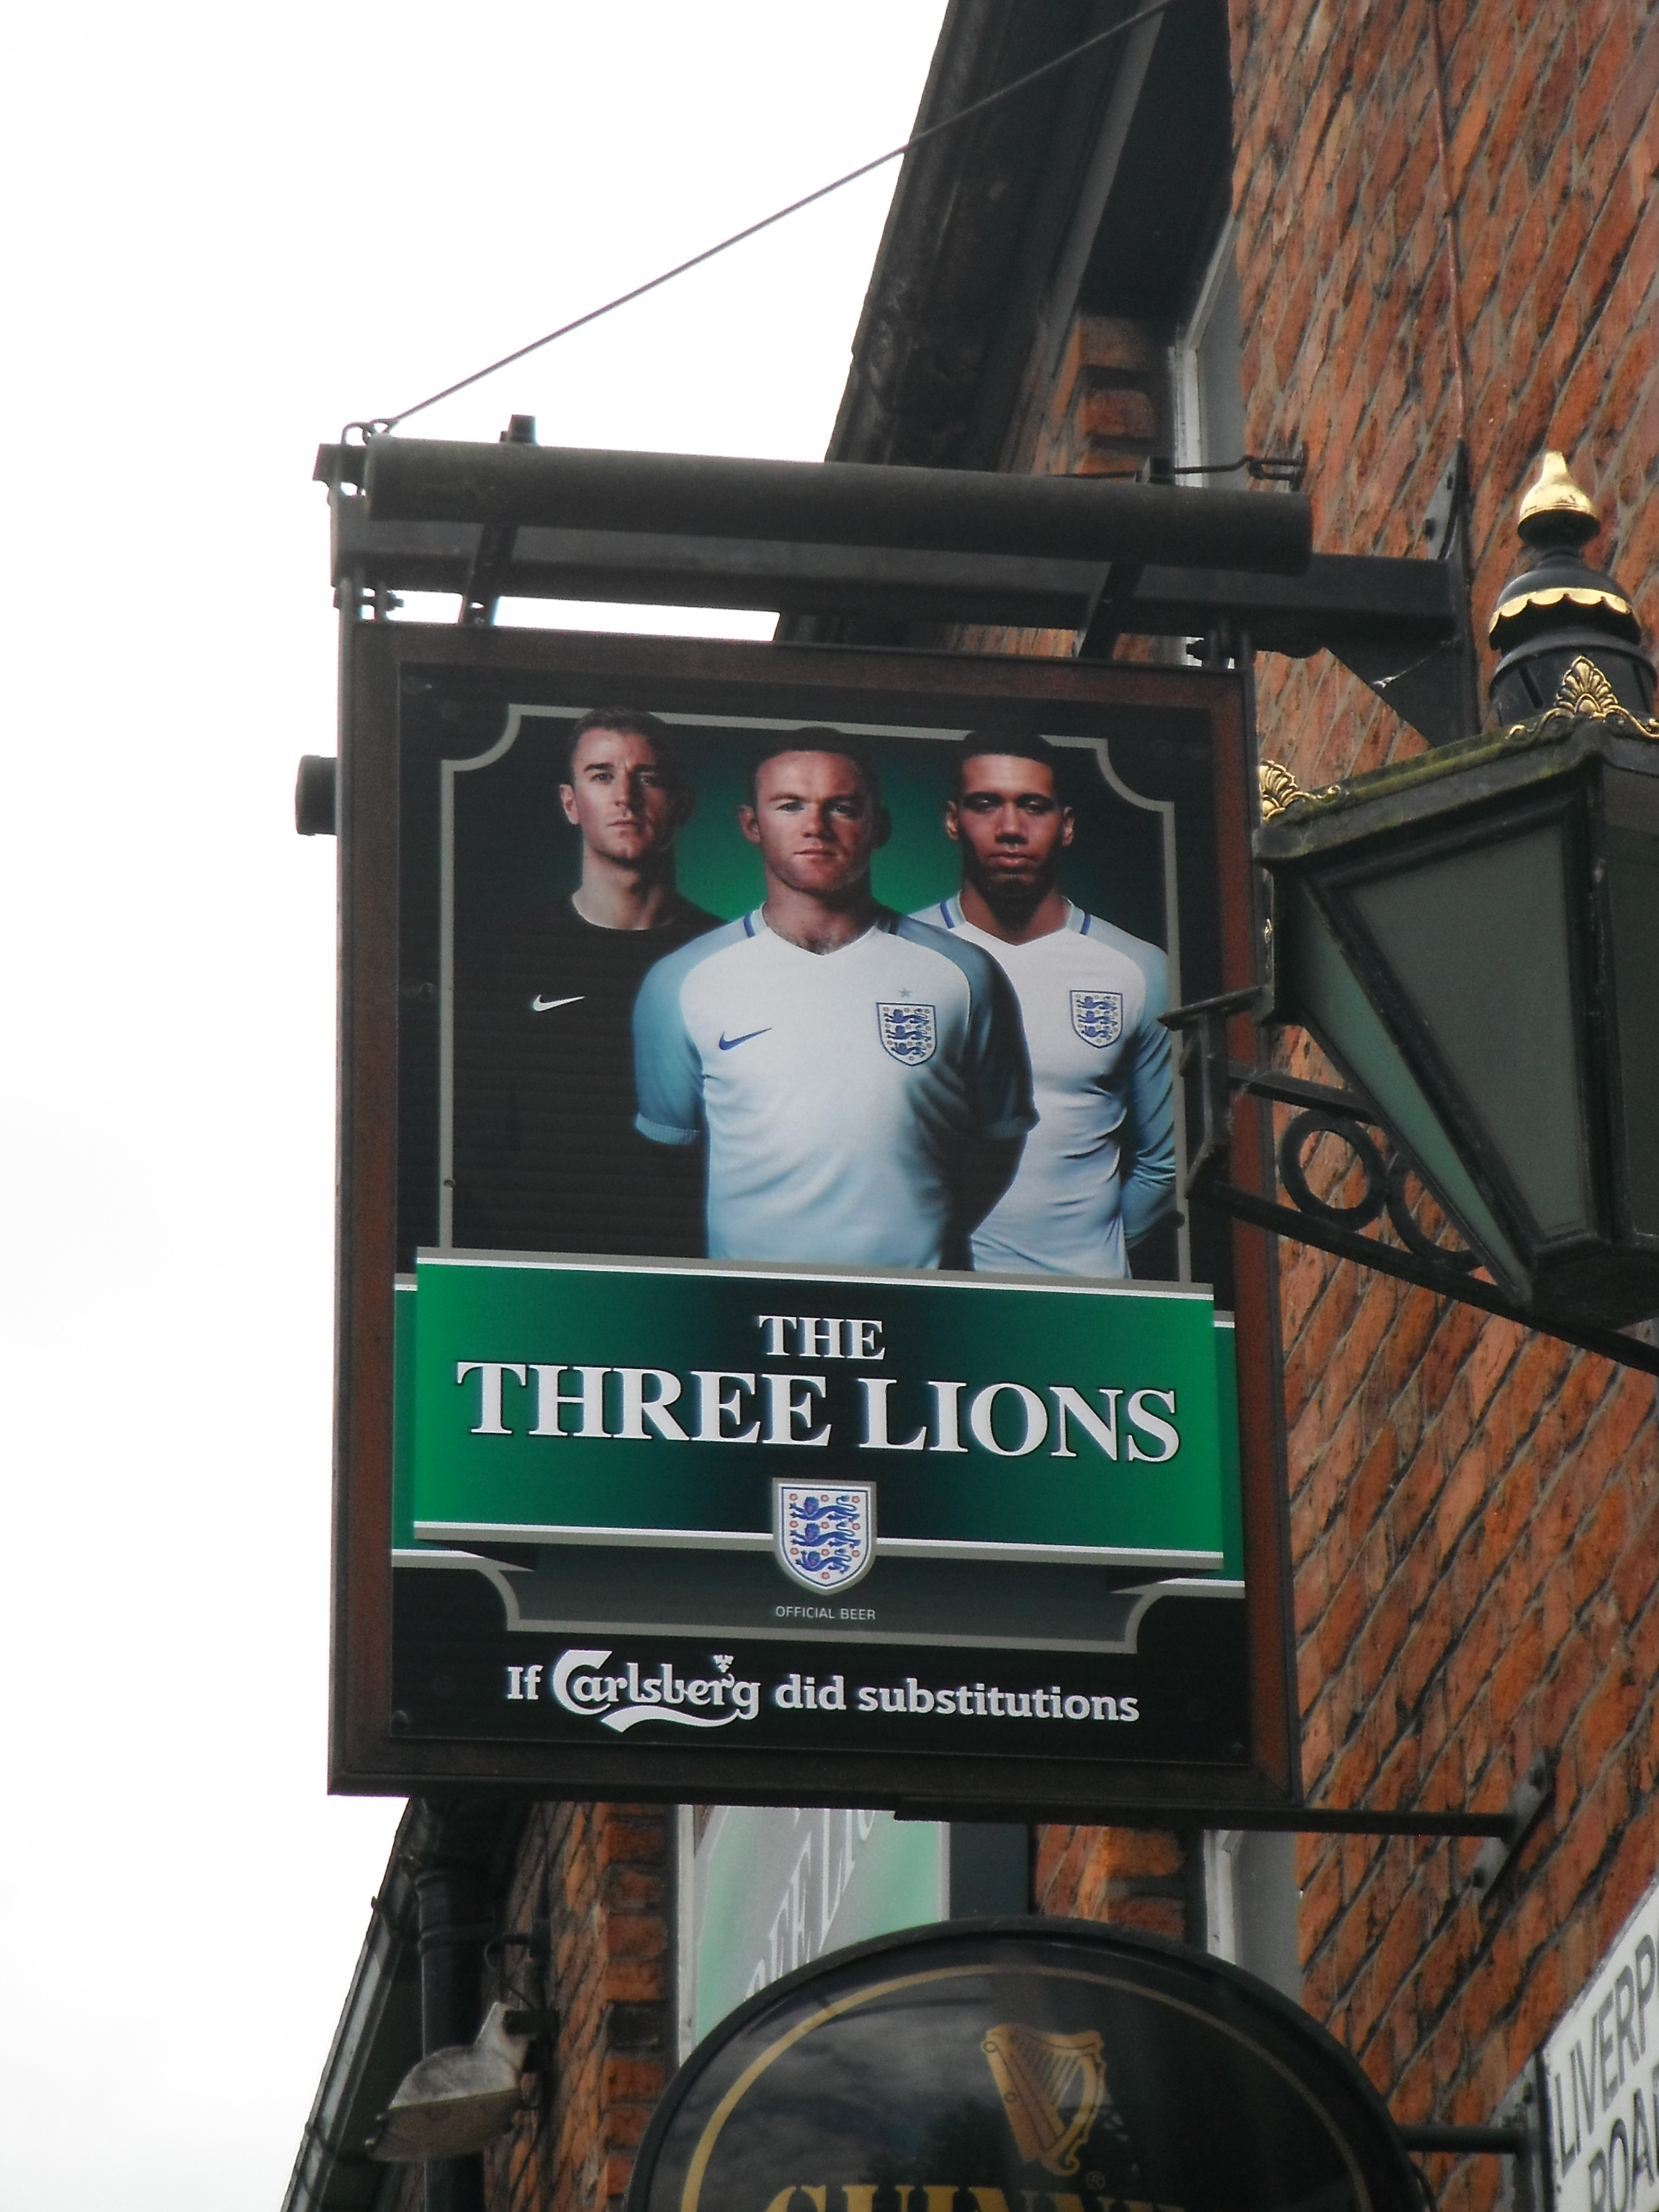 Photo taken by me – The Three Lions Pub, Castlefield, Manchester